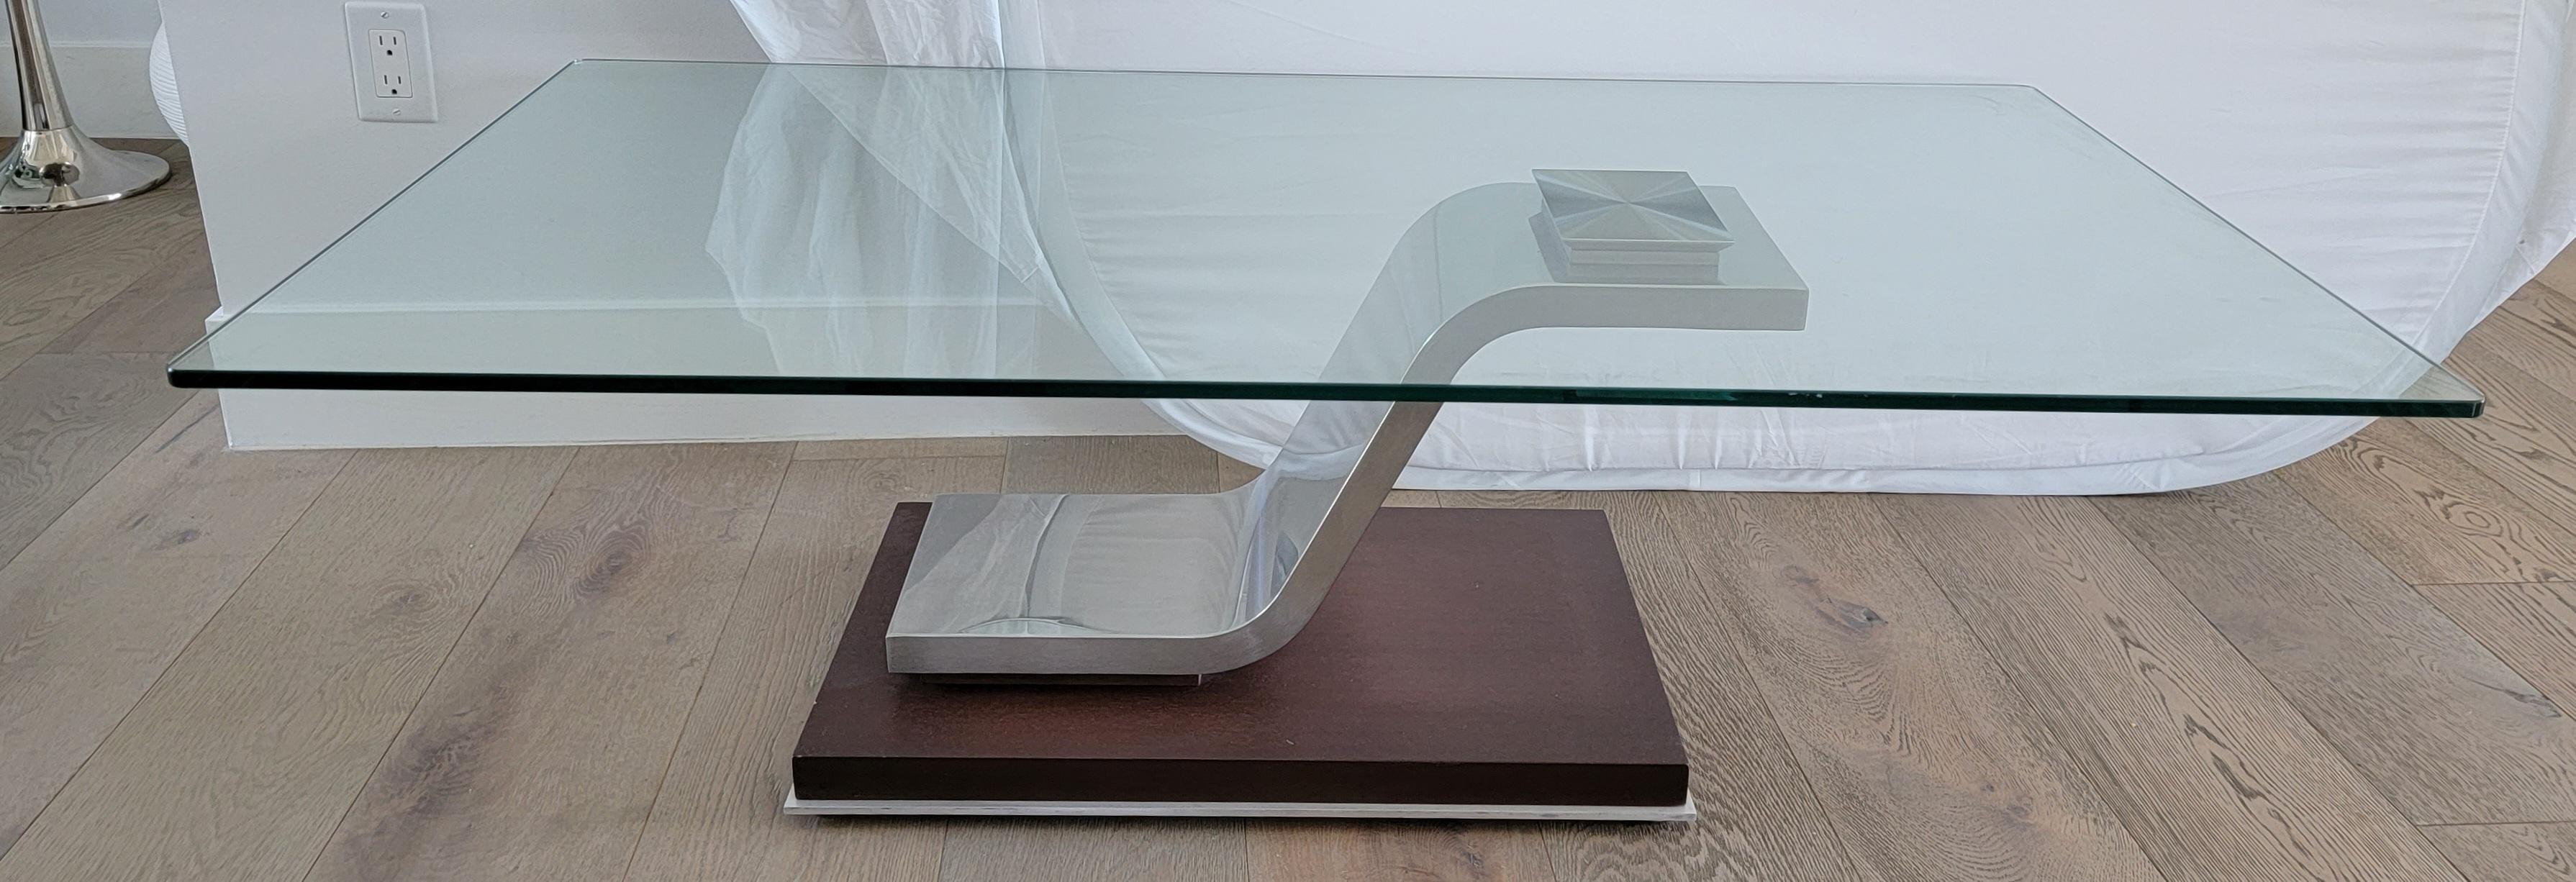 Wood, Chrome and Glass Coffee Table In Good Condition For Sale In Pasadena, CA